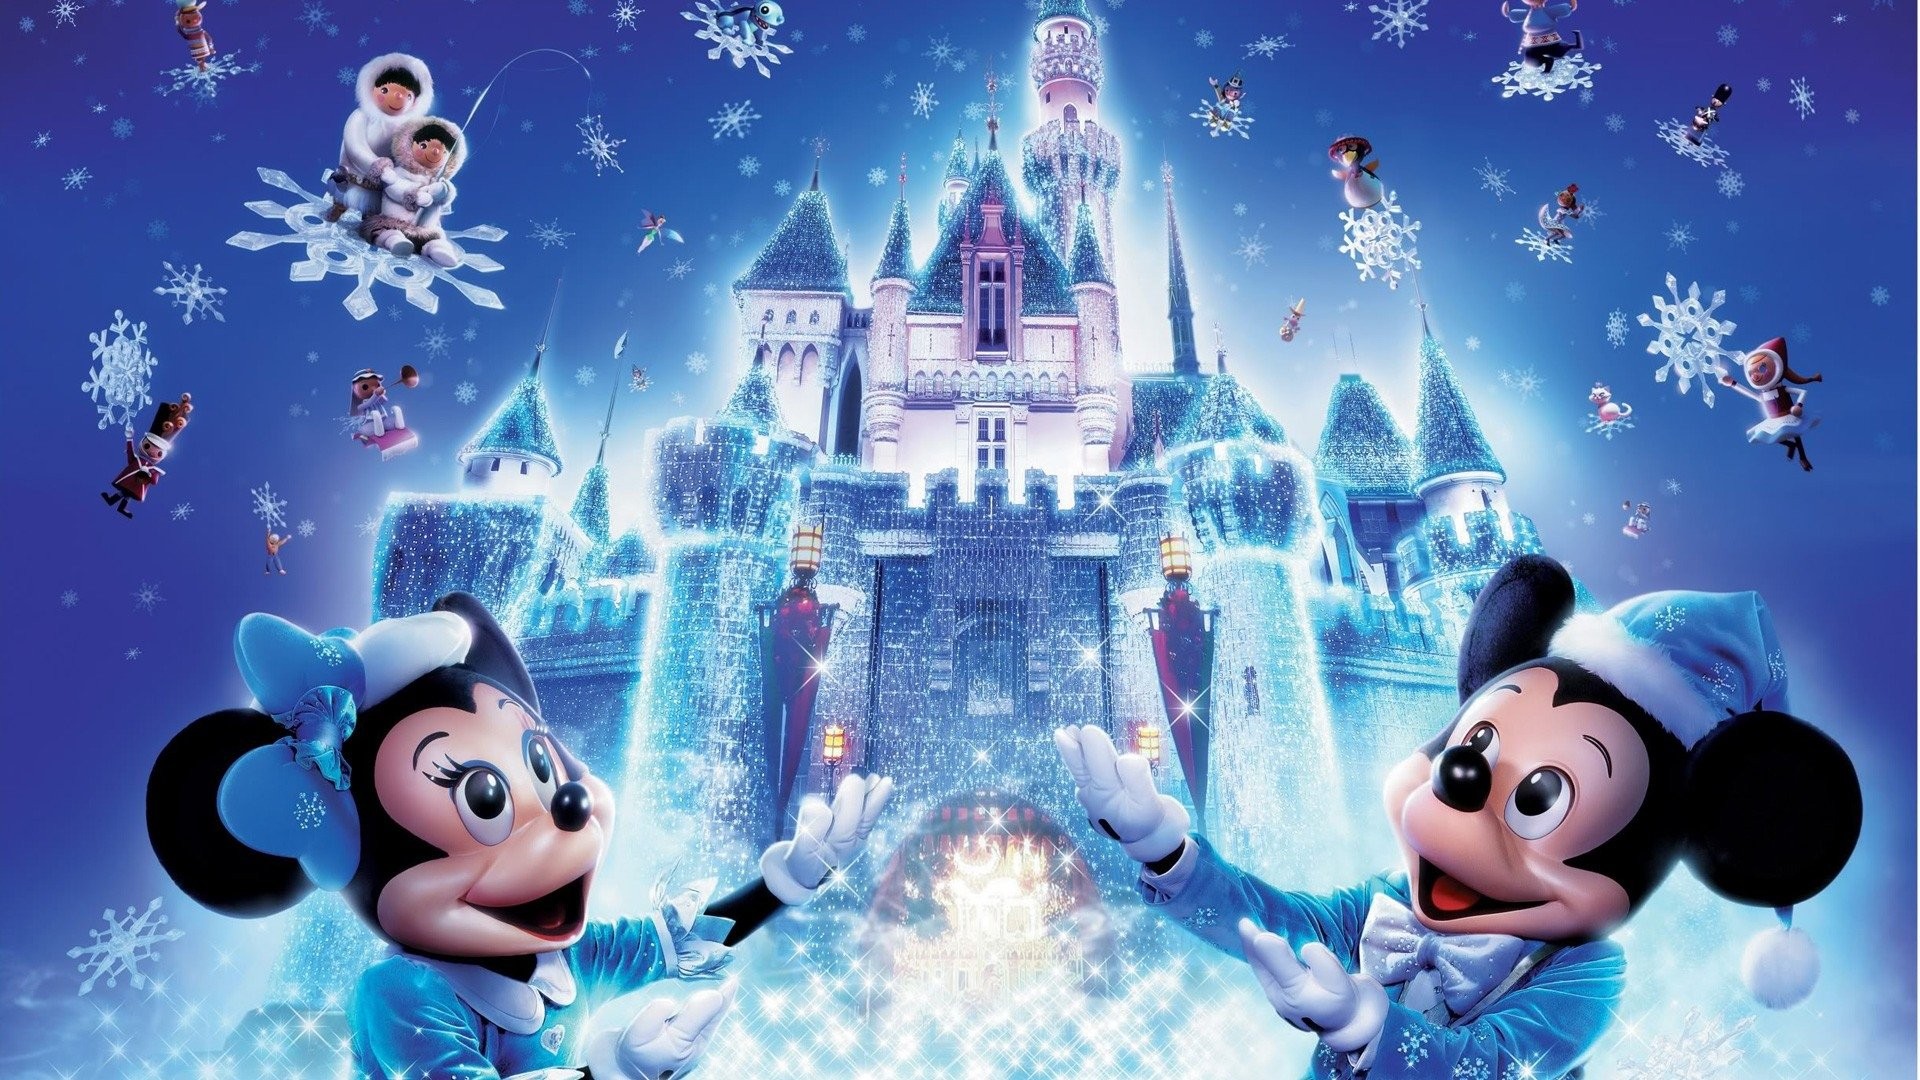 64 Disney Wallpapers ① Download Free Amazing Full Hd Wallpapers